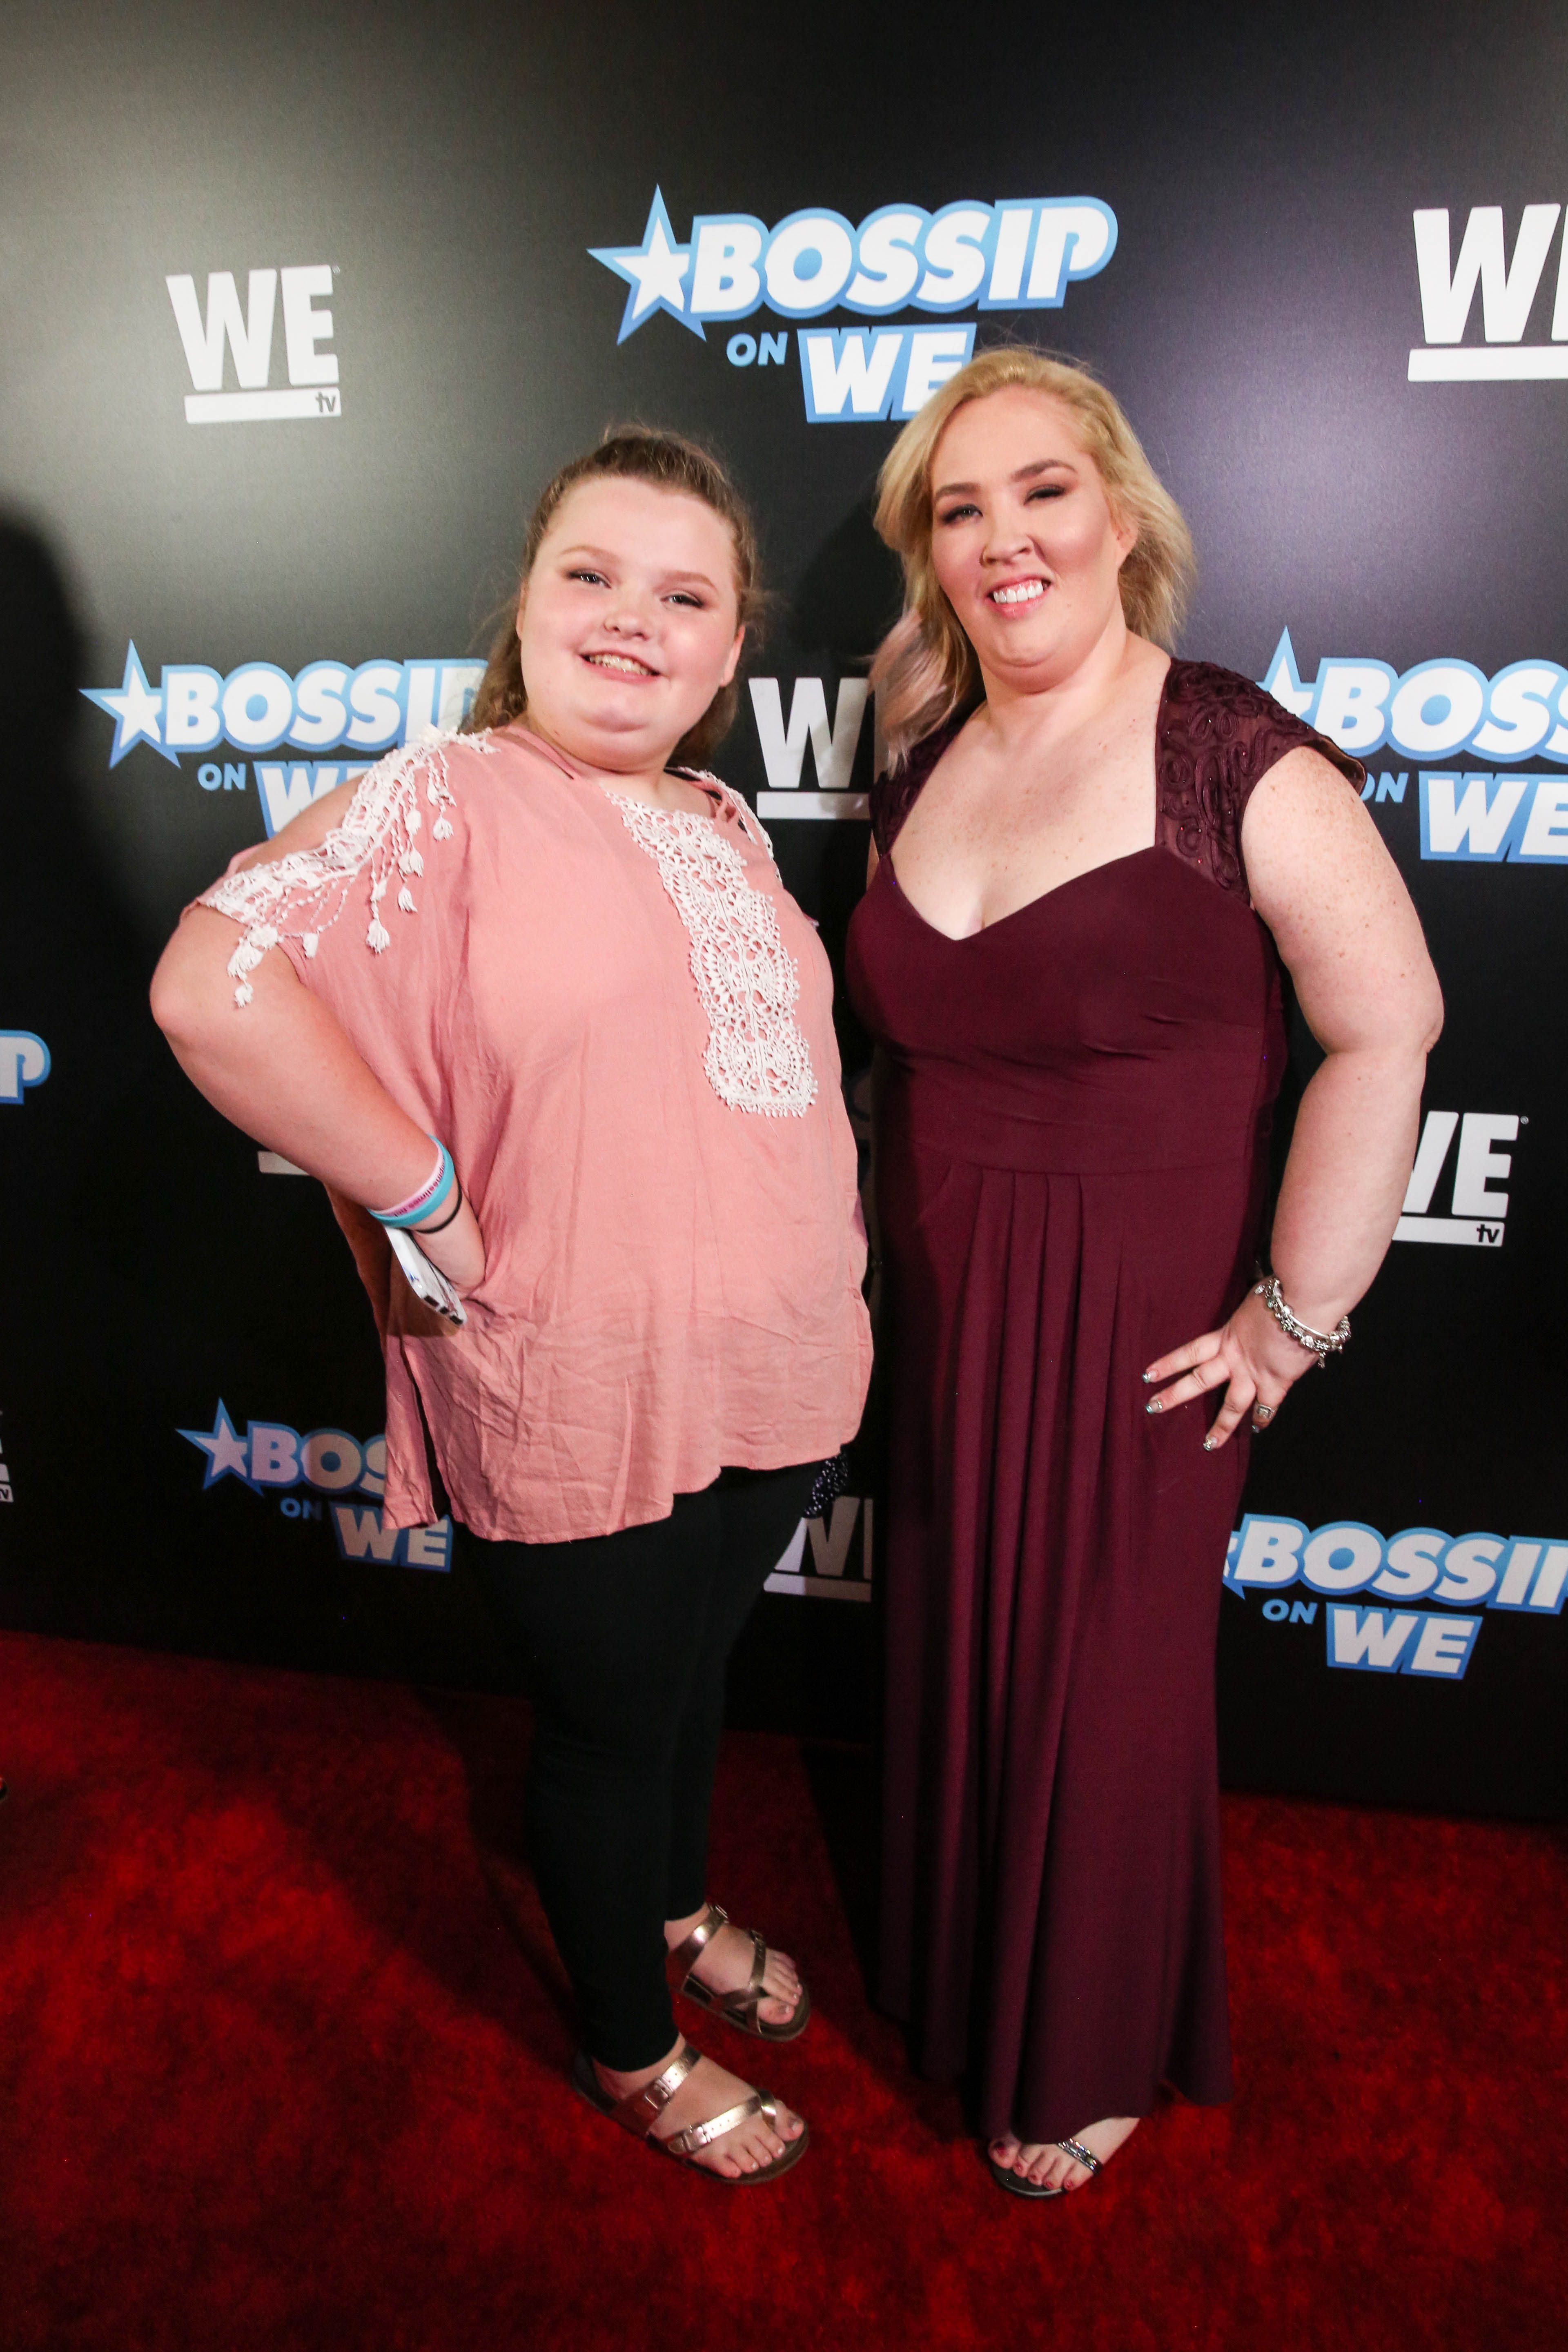 Alana Thompson and June Shannon attend Bossip's "Best Dress List" event in Los Angeles on July 31, 2018 | Photo: Getty Images